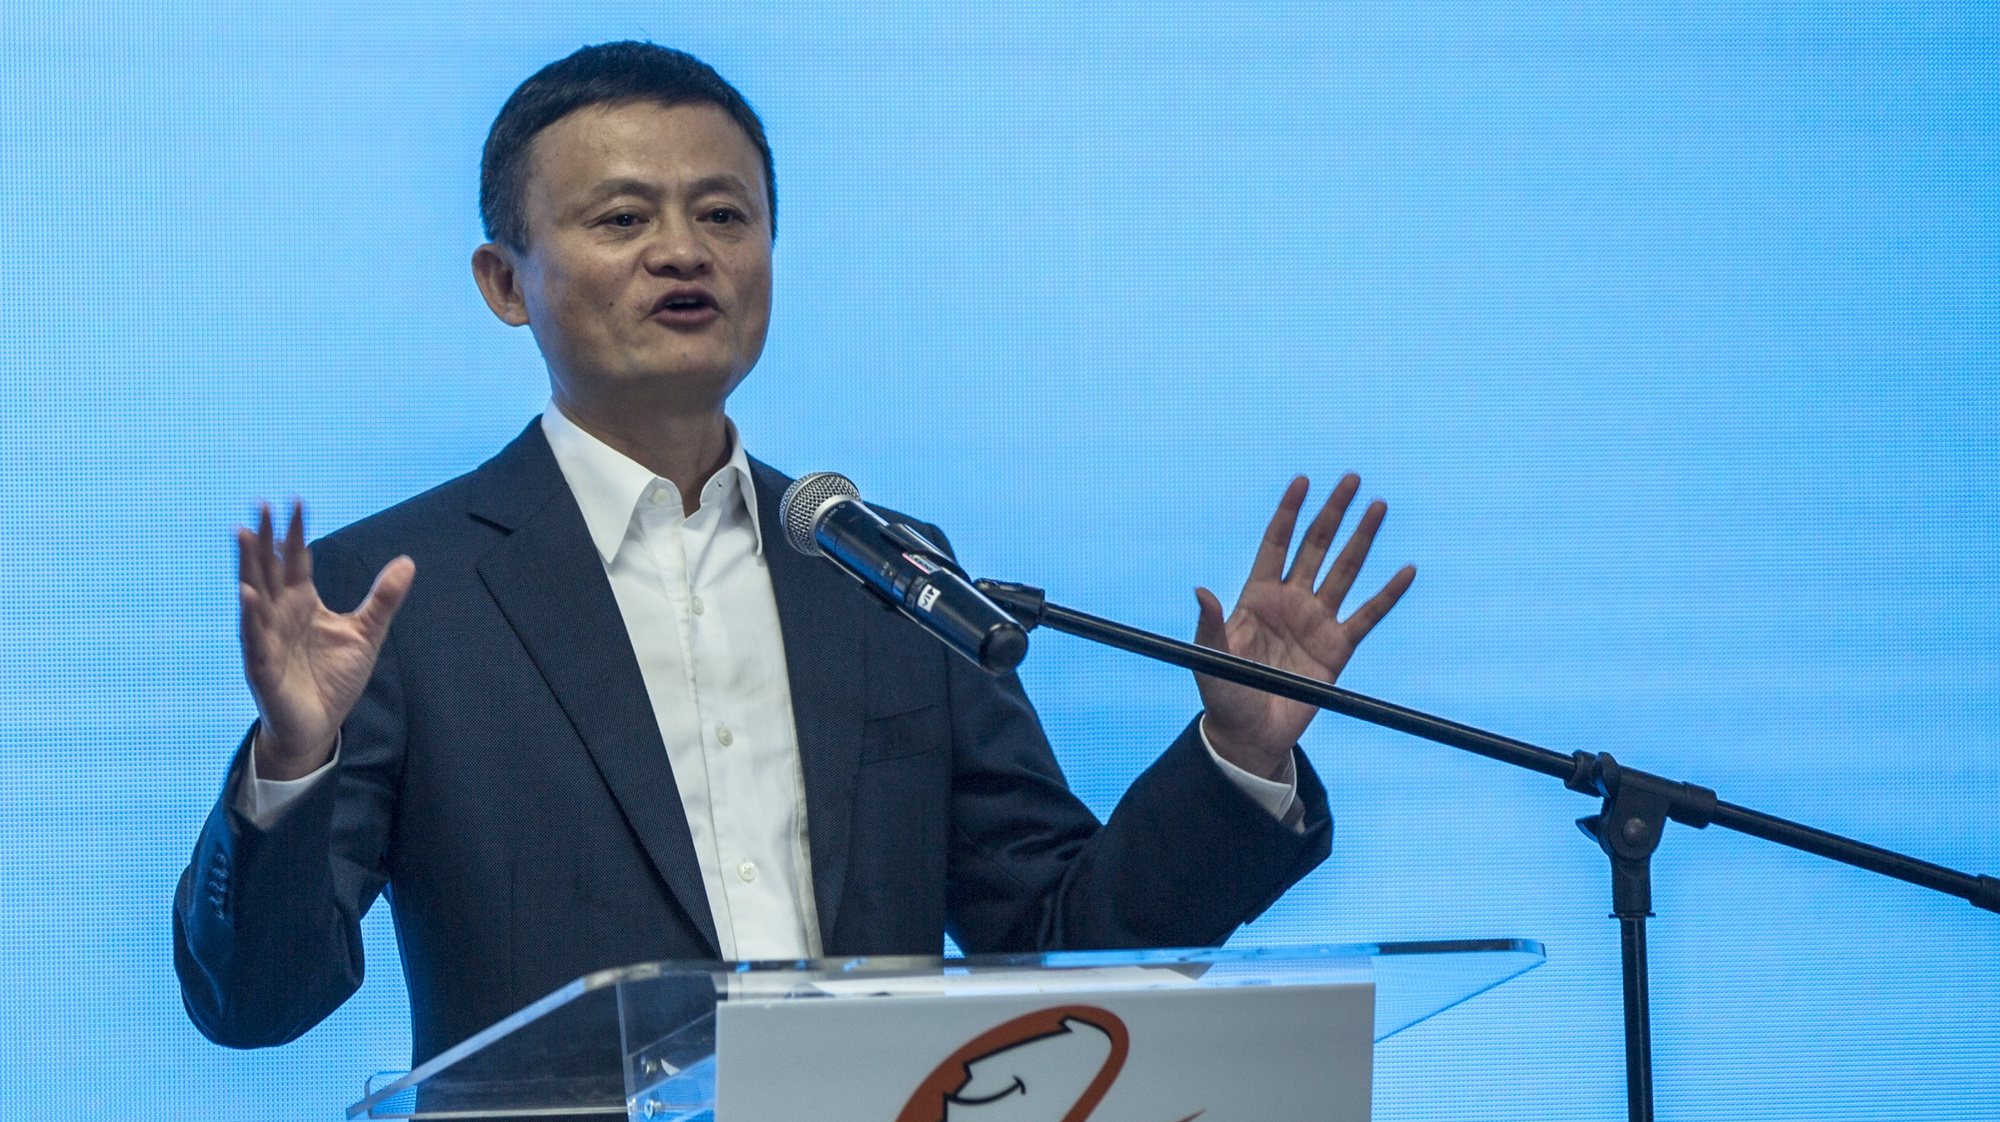 epa08902046 (FILE) - Jack Ma, the founder and executive chairman of Chinese e-commerce company Alibaba Group delivers his speech during the opening of the Alibaba group office in Kuala Lumpur, Malaysia, 18 June 2018 (reissued 24 December 2020). According to media reports on 24 December 2020, China&#039;s State Administration for Market Regulation initiated a probe into the business practices of e-commerce company Alibaba, due to allegations of monopolistic acts.  EPA/AHMAD YUSNI